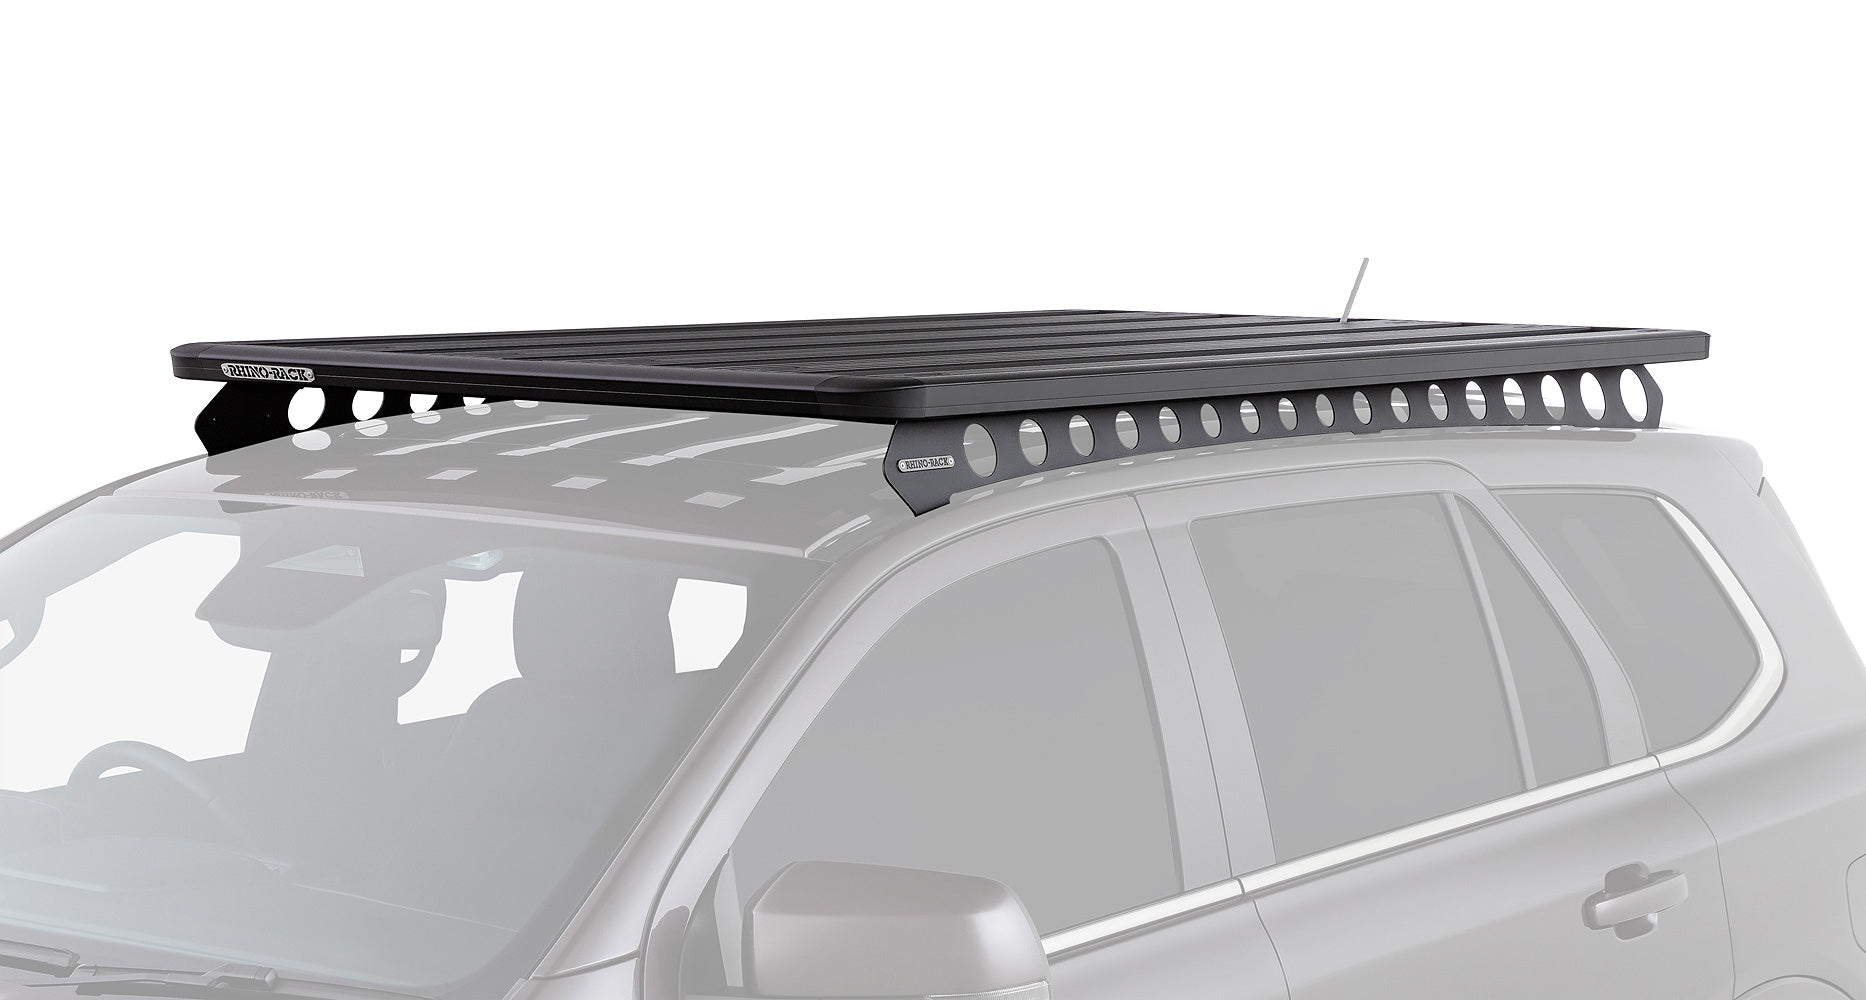 Rhino Rack Pioneer Platform Roof Tray - The ultimate load carrying accessory | Stoke Equipment Co Nelson